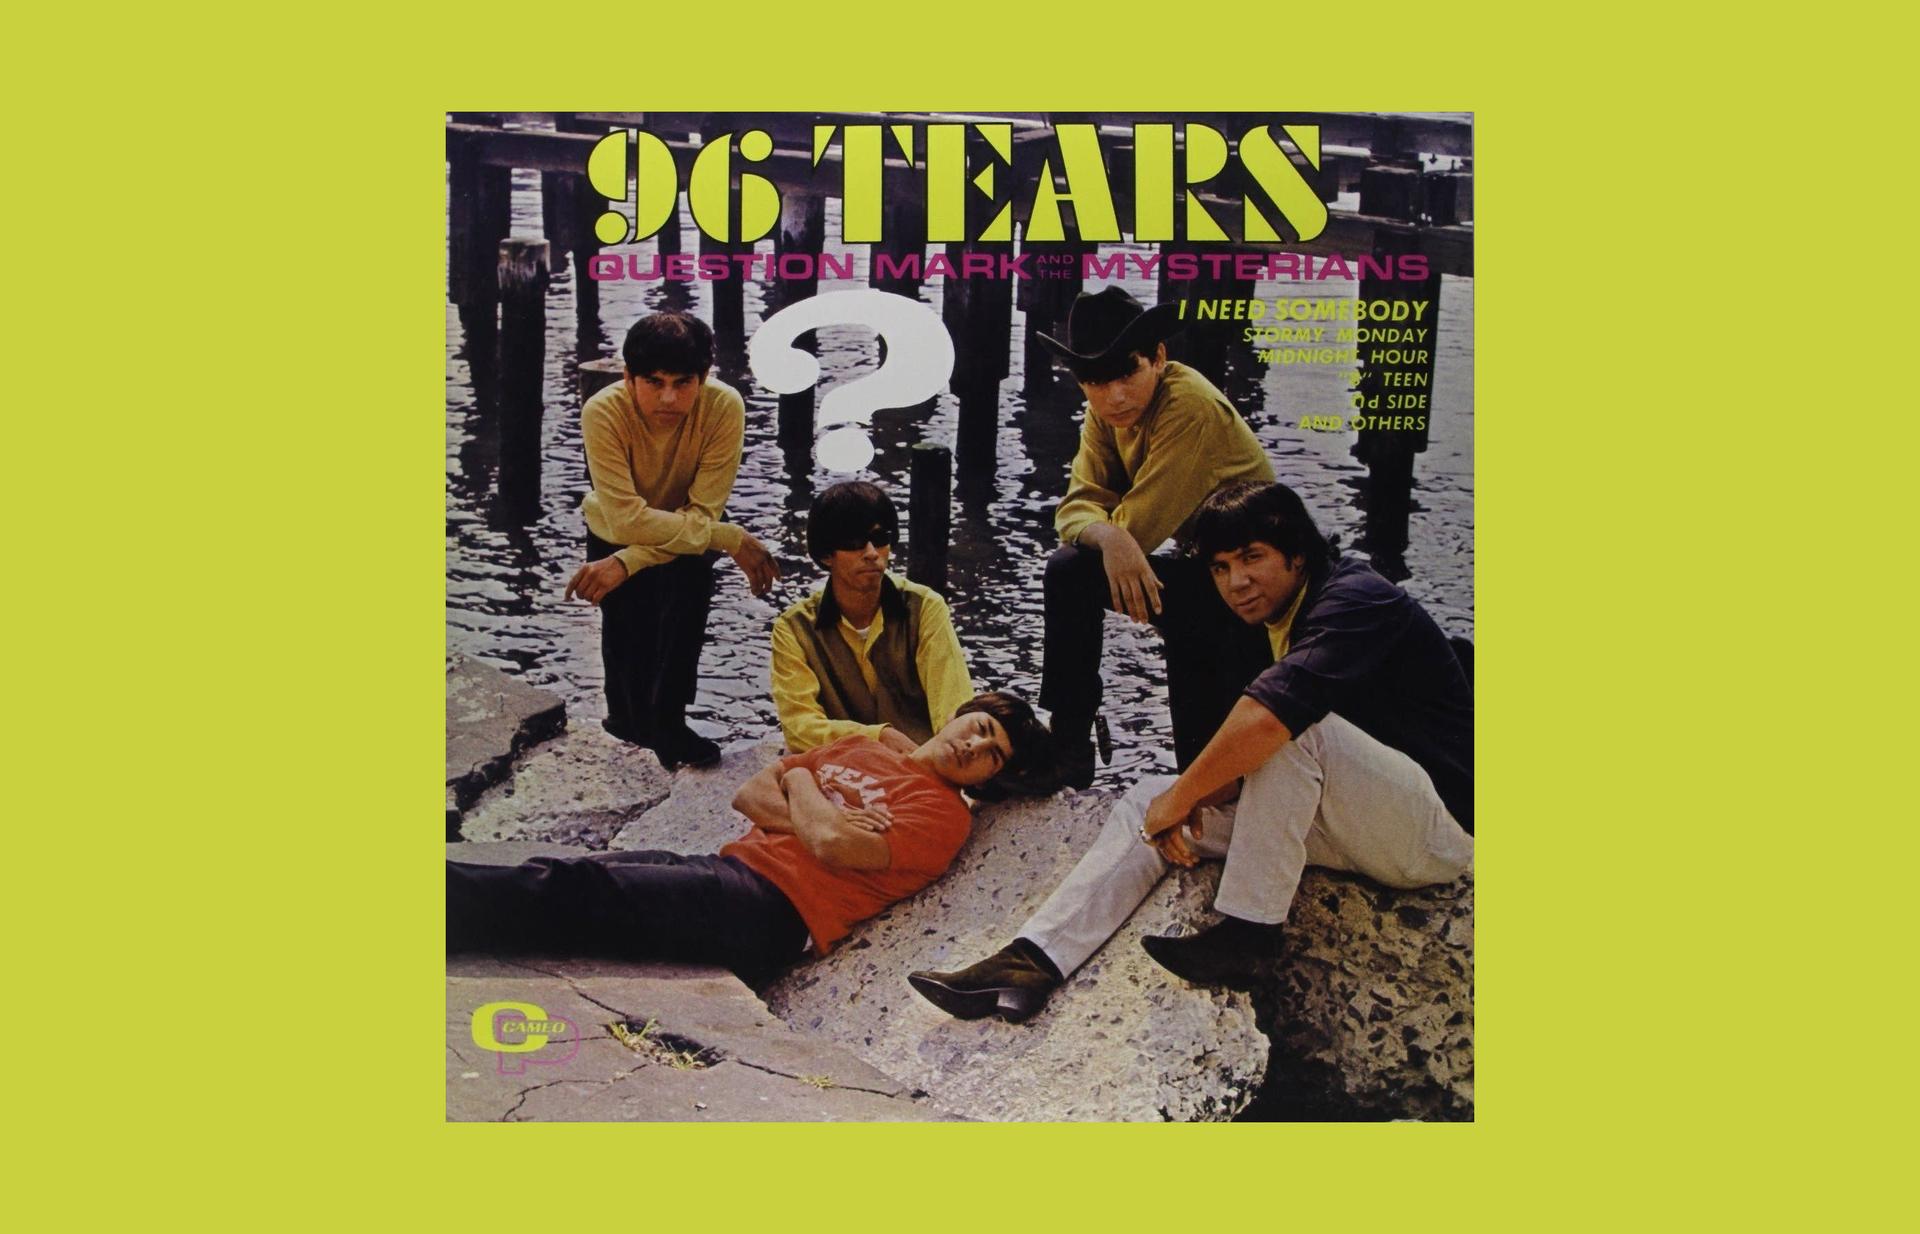 The 1966 album “96 Tears” from ? and the Mysterians.